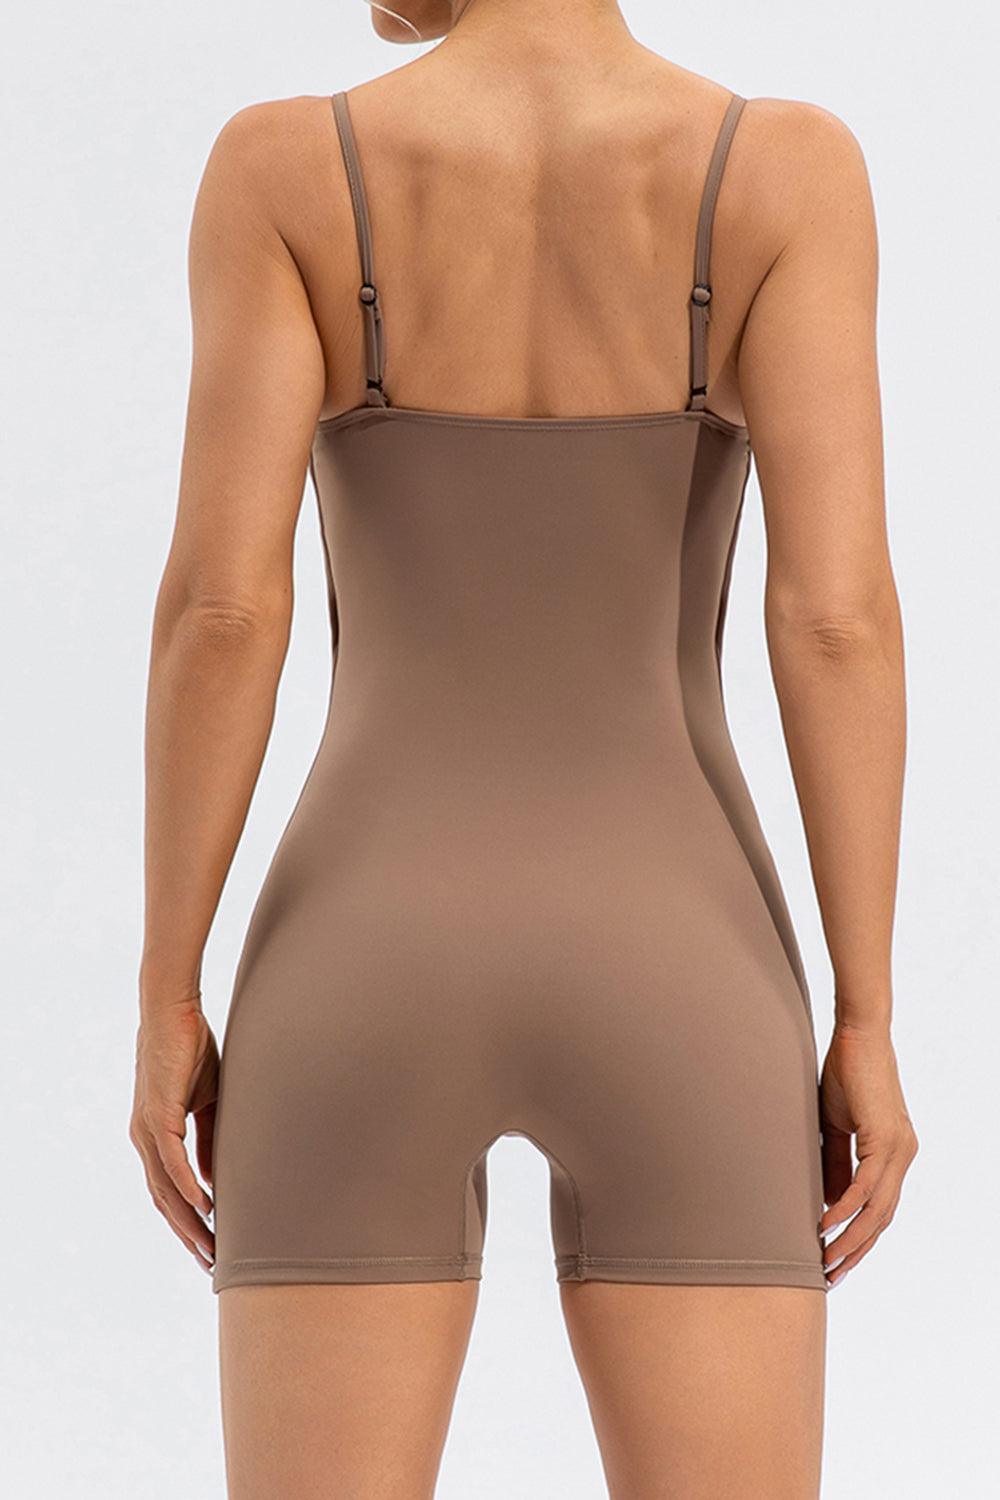 a woman in a tan bodysuit with her back to the camera